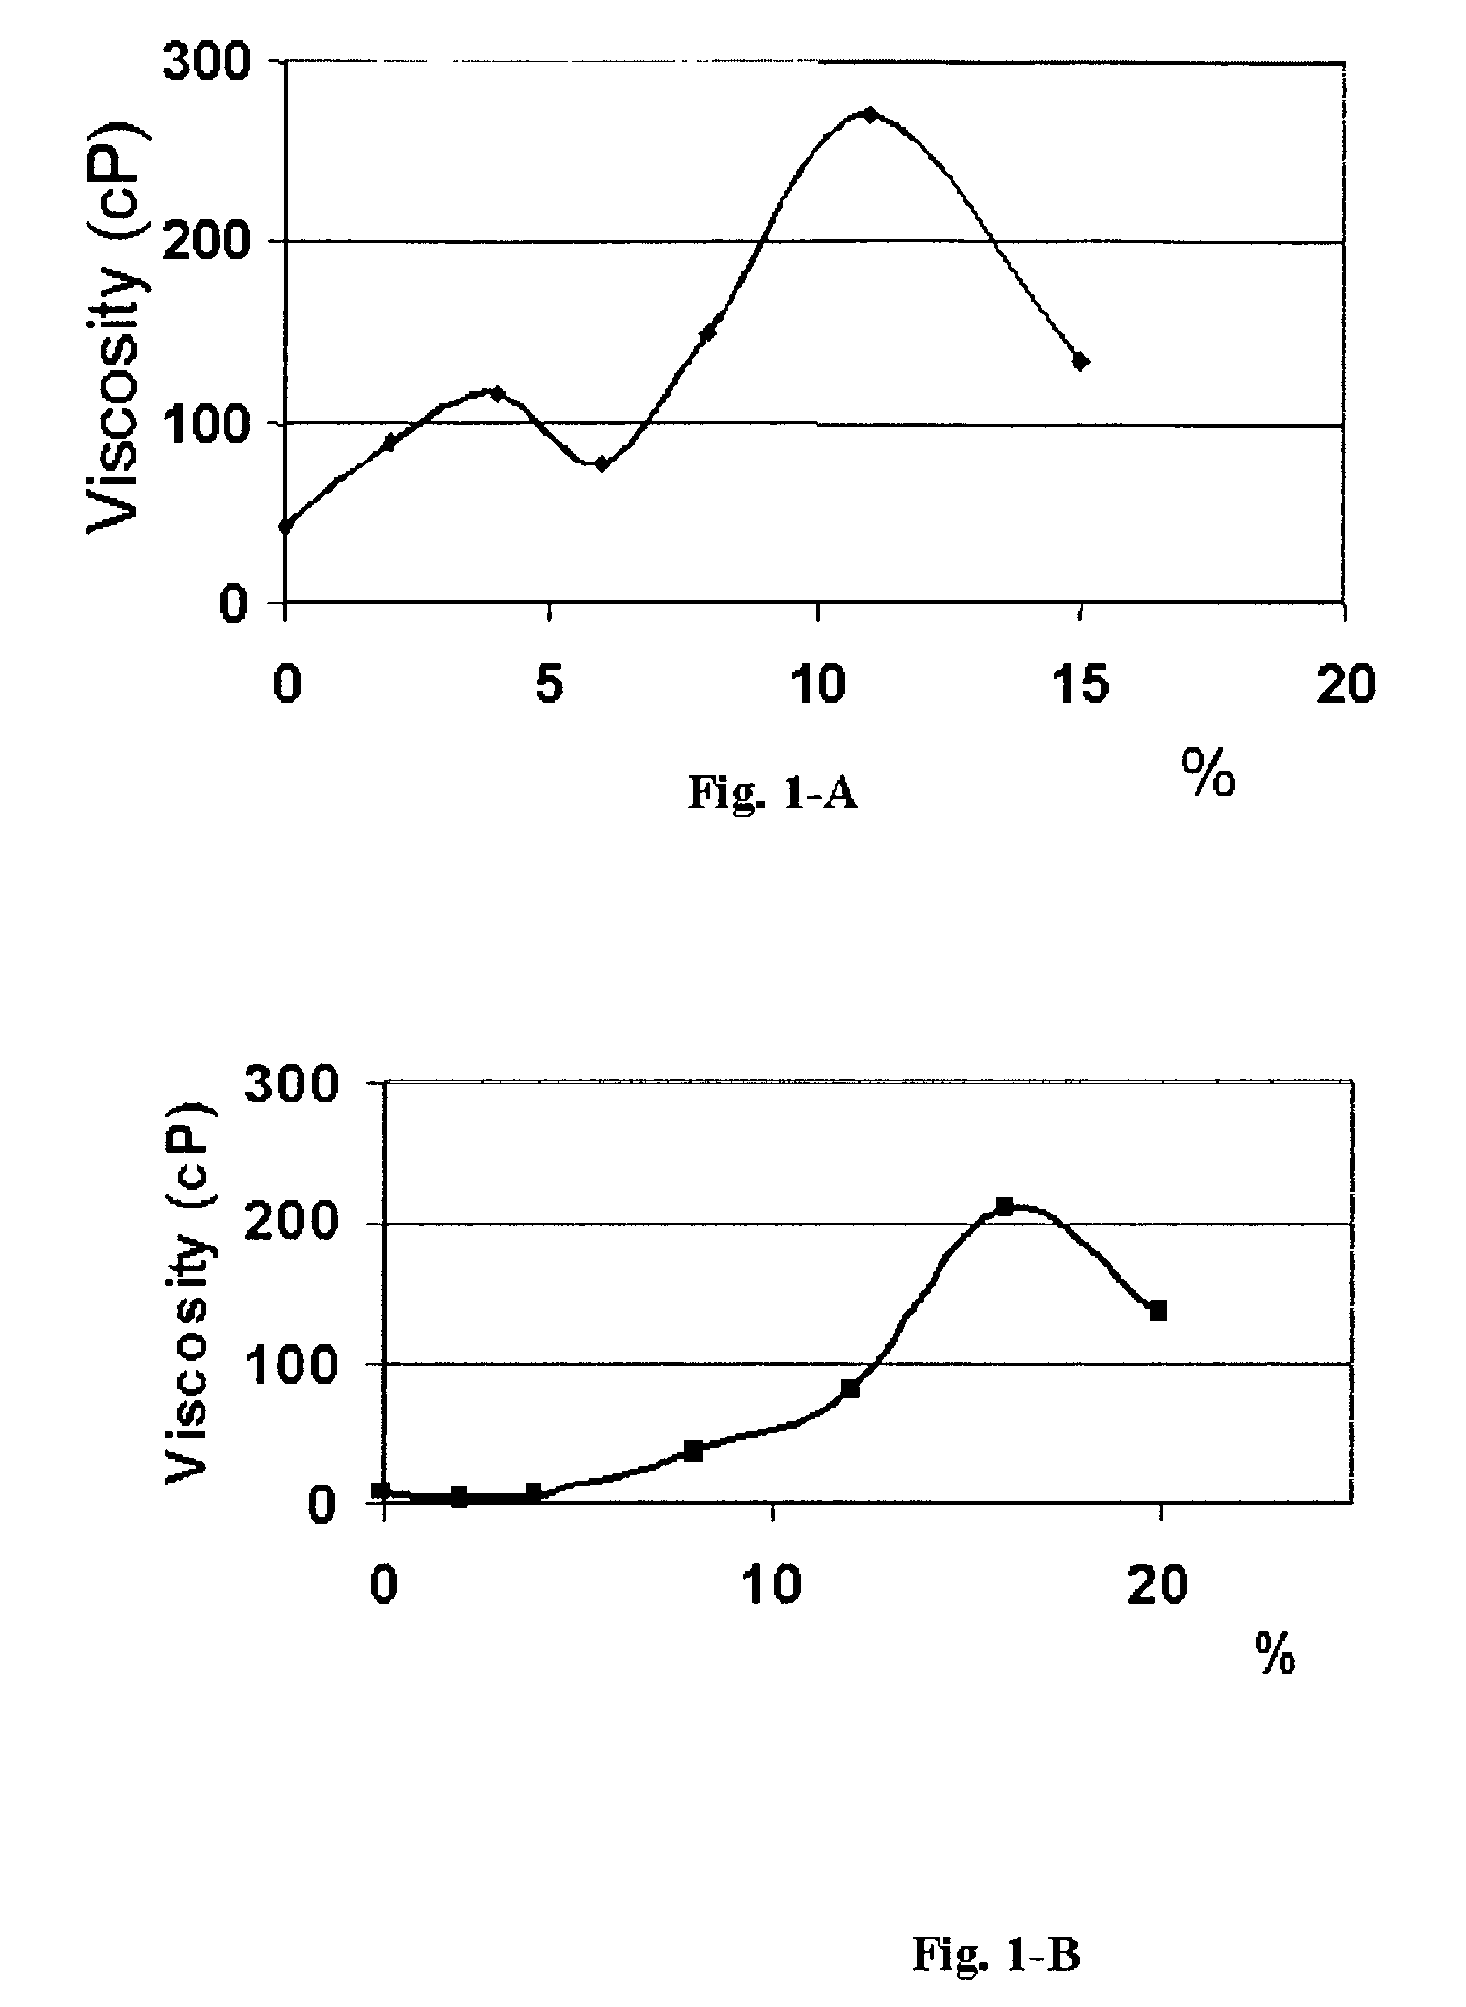 Fluid system having controllable reversible viscosity